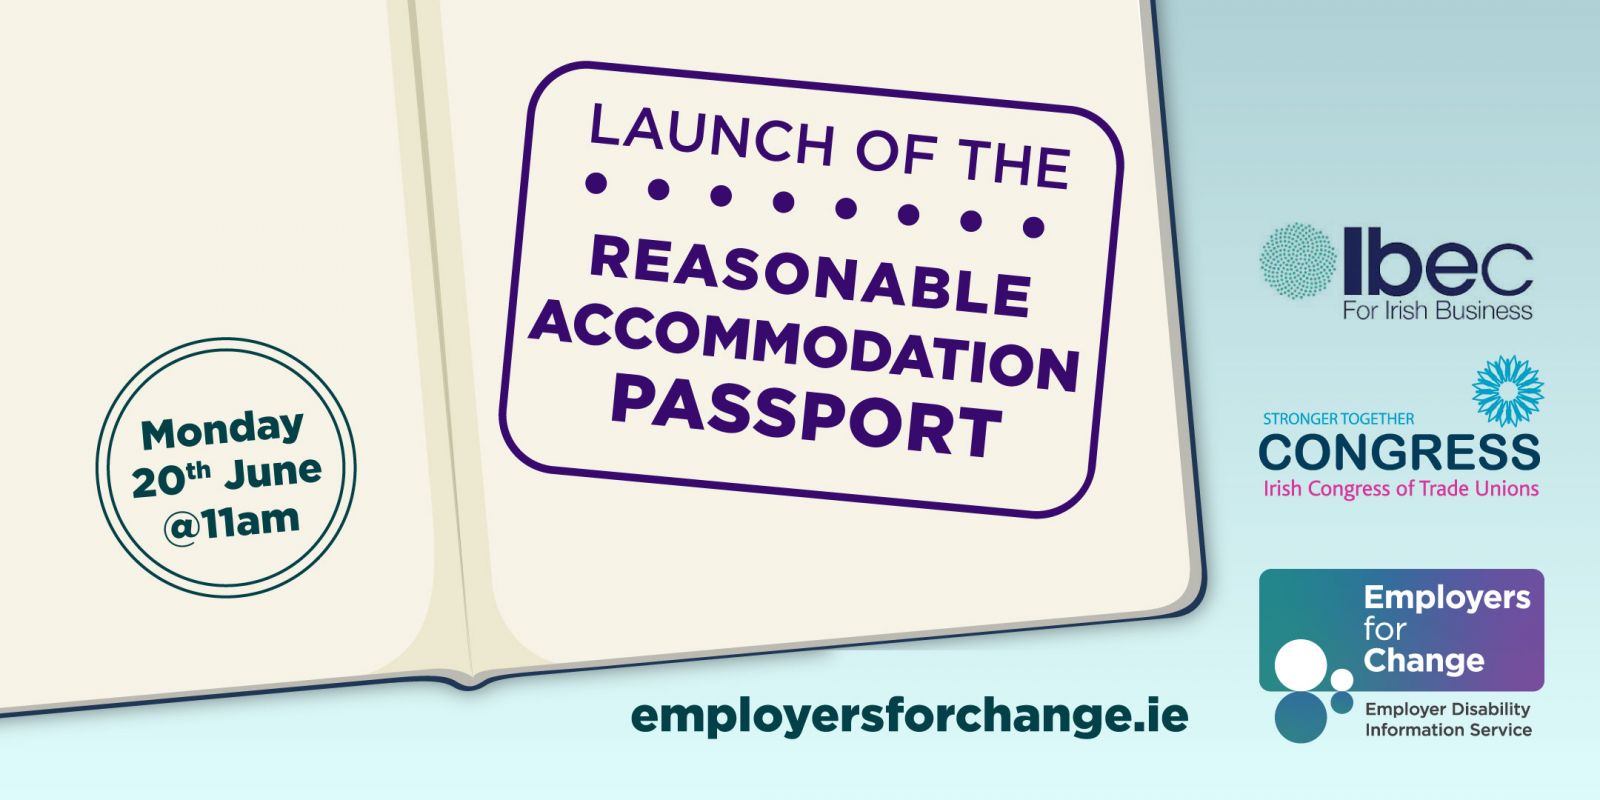 A graphic of a passport book open on an page with a blue background behind the book. On the page there is a stamp stating: Launch of the Reasonable Accommodation Passport. Monday 20th of June at 11am.   At the bottom of the page there is the Ibec: For Irish Business logo, the ICTU: Irish Congress of Trade Unions logo and the Employers for Change logo.